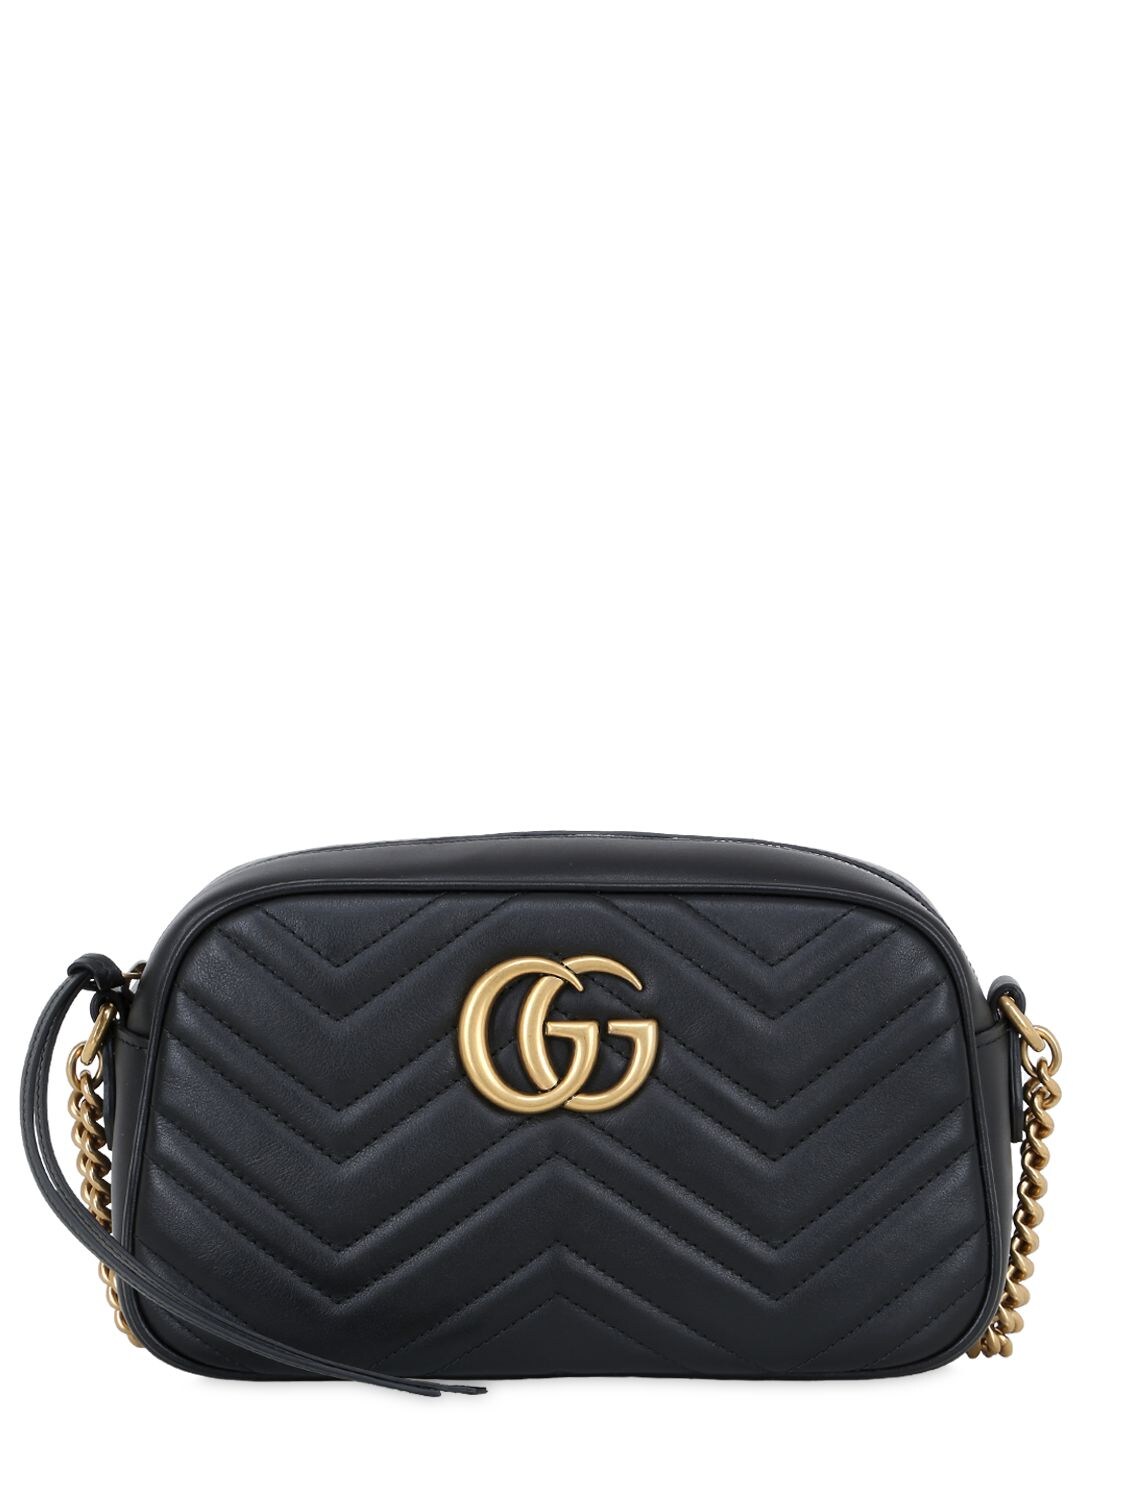 SMALL GG MARMONT 2.0 QUILTED LEATHER BAG